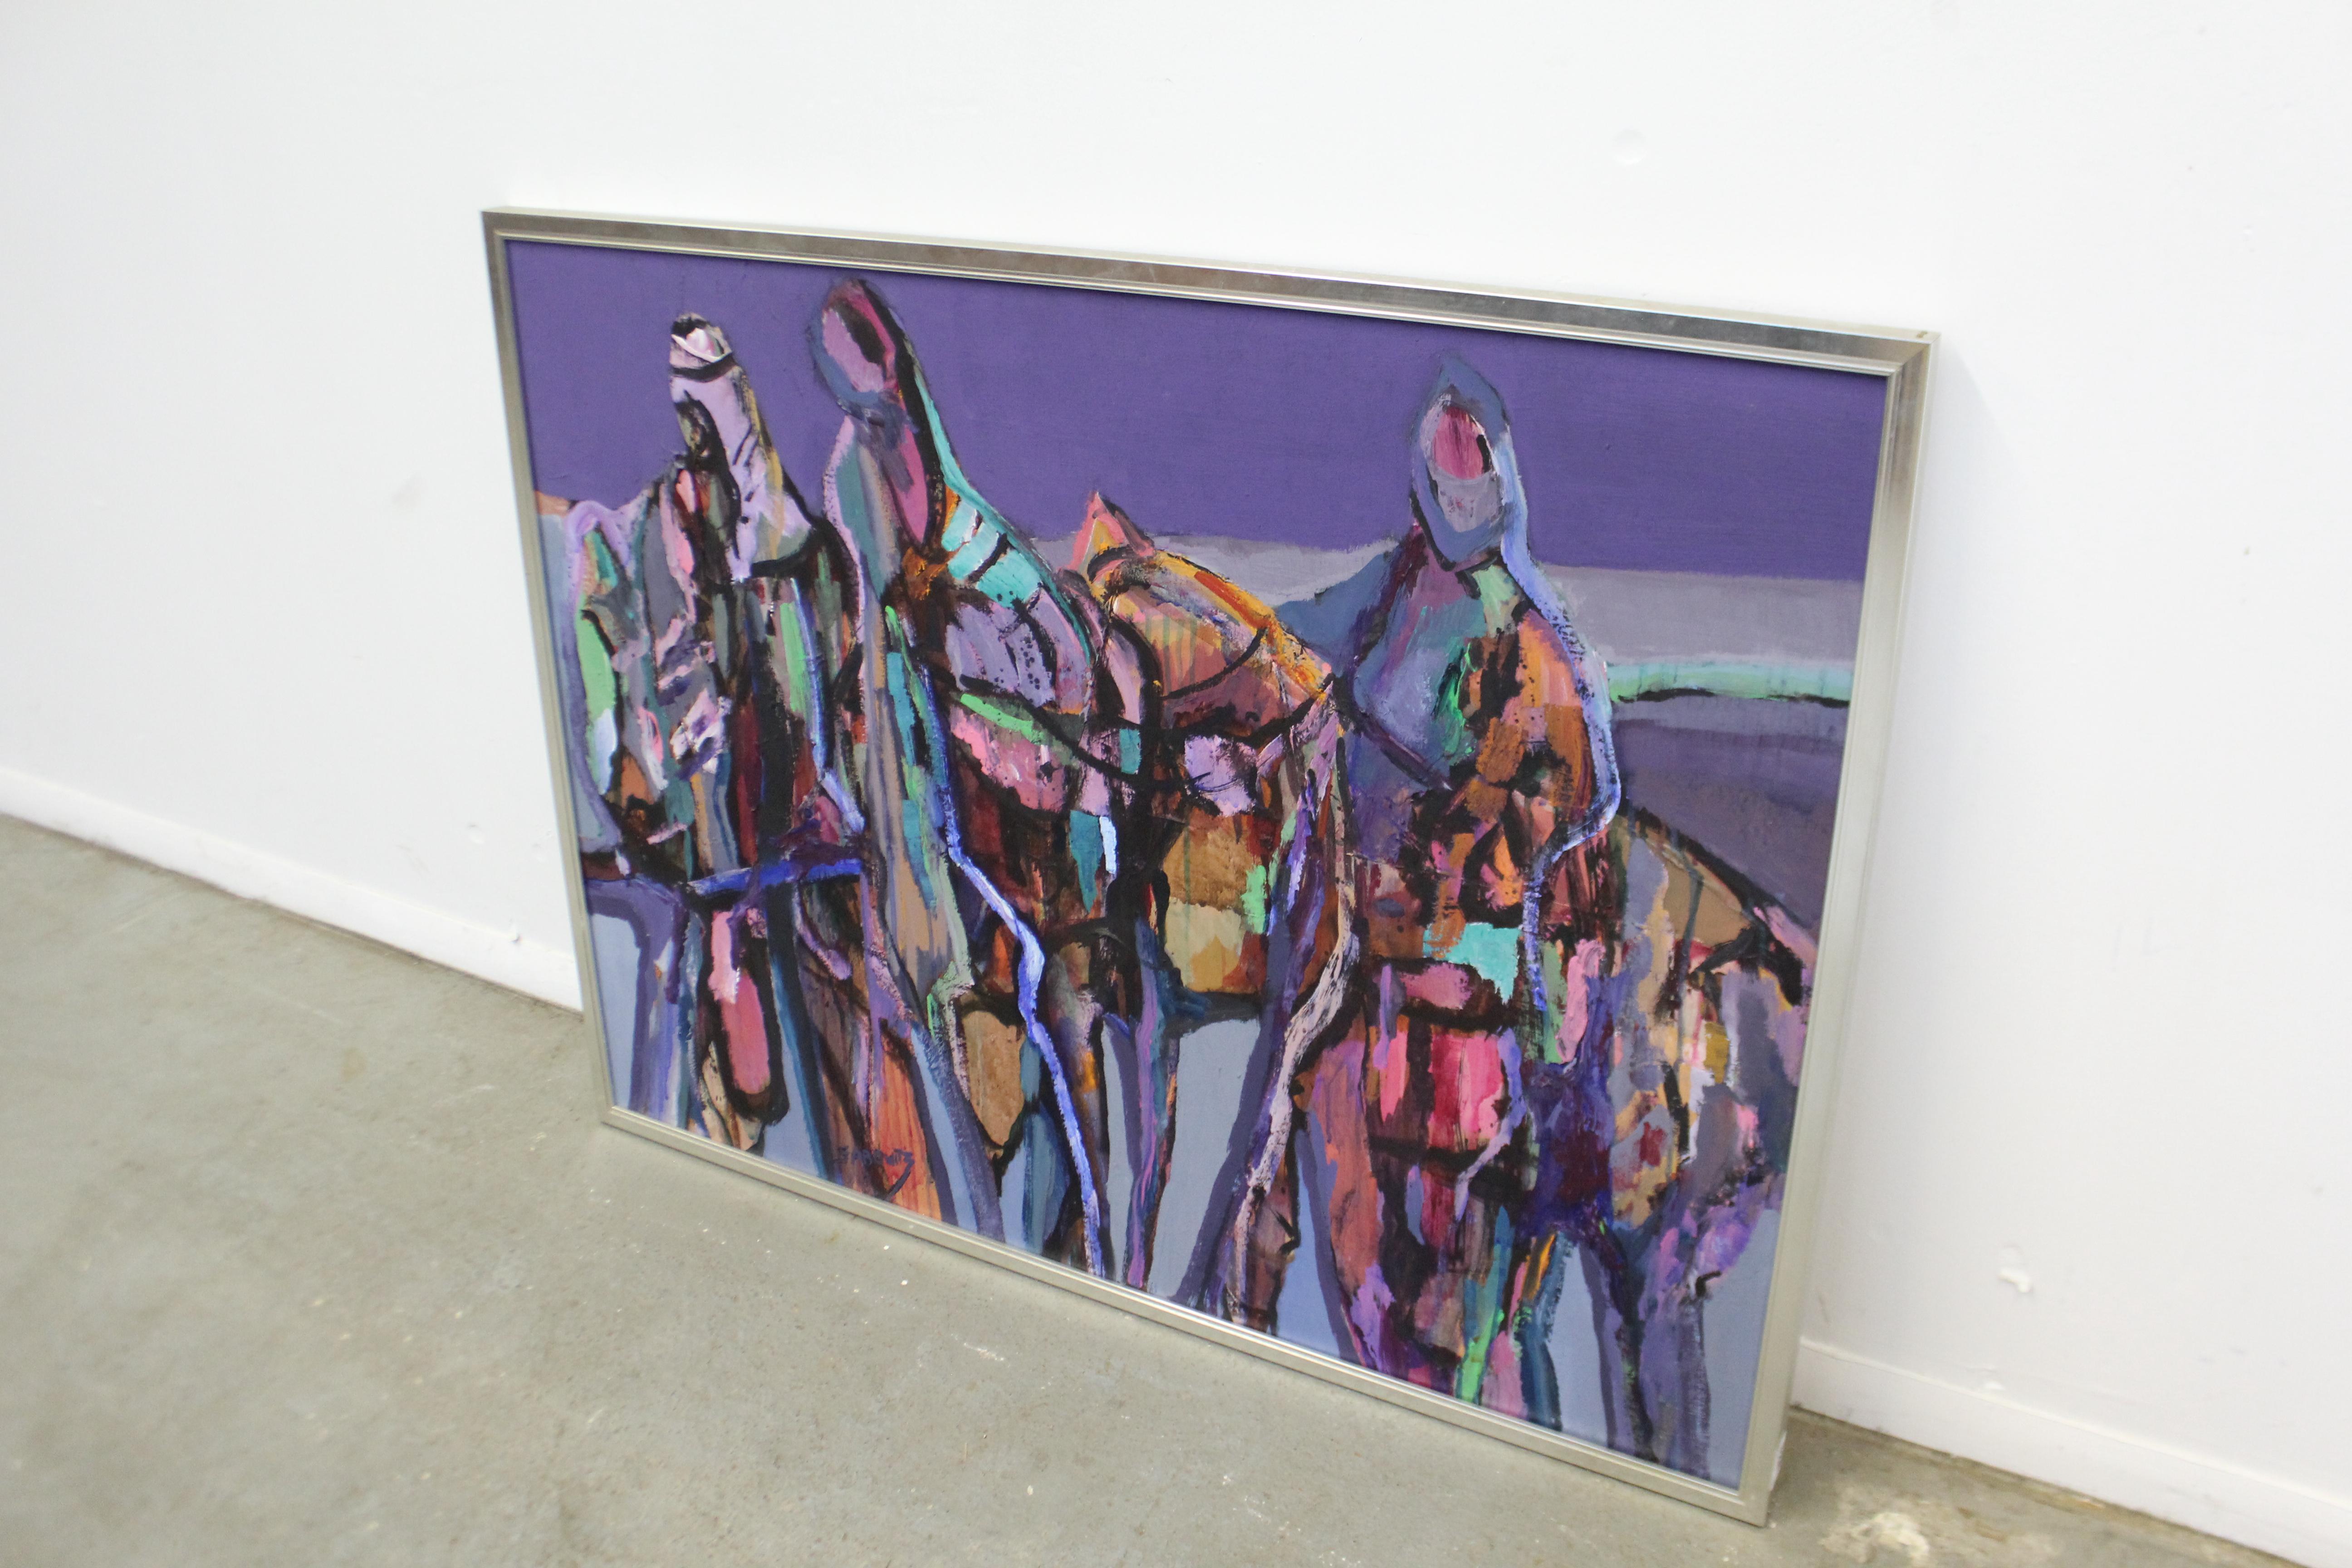 Offered is a large vintage abstract acrylic painting on canvas, entitled 'Caravan' by Ruth Sabowitz in 1980. Features colorful acrylic depicting what looks to be a caravan on horses. It is in very good condition with slight age wear on the metal